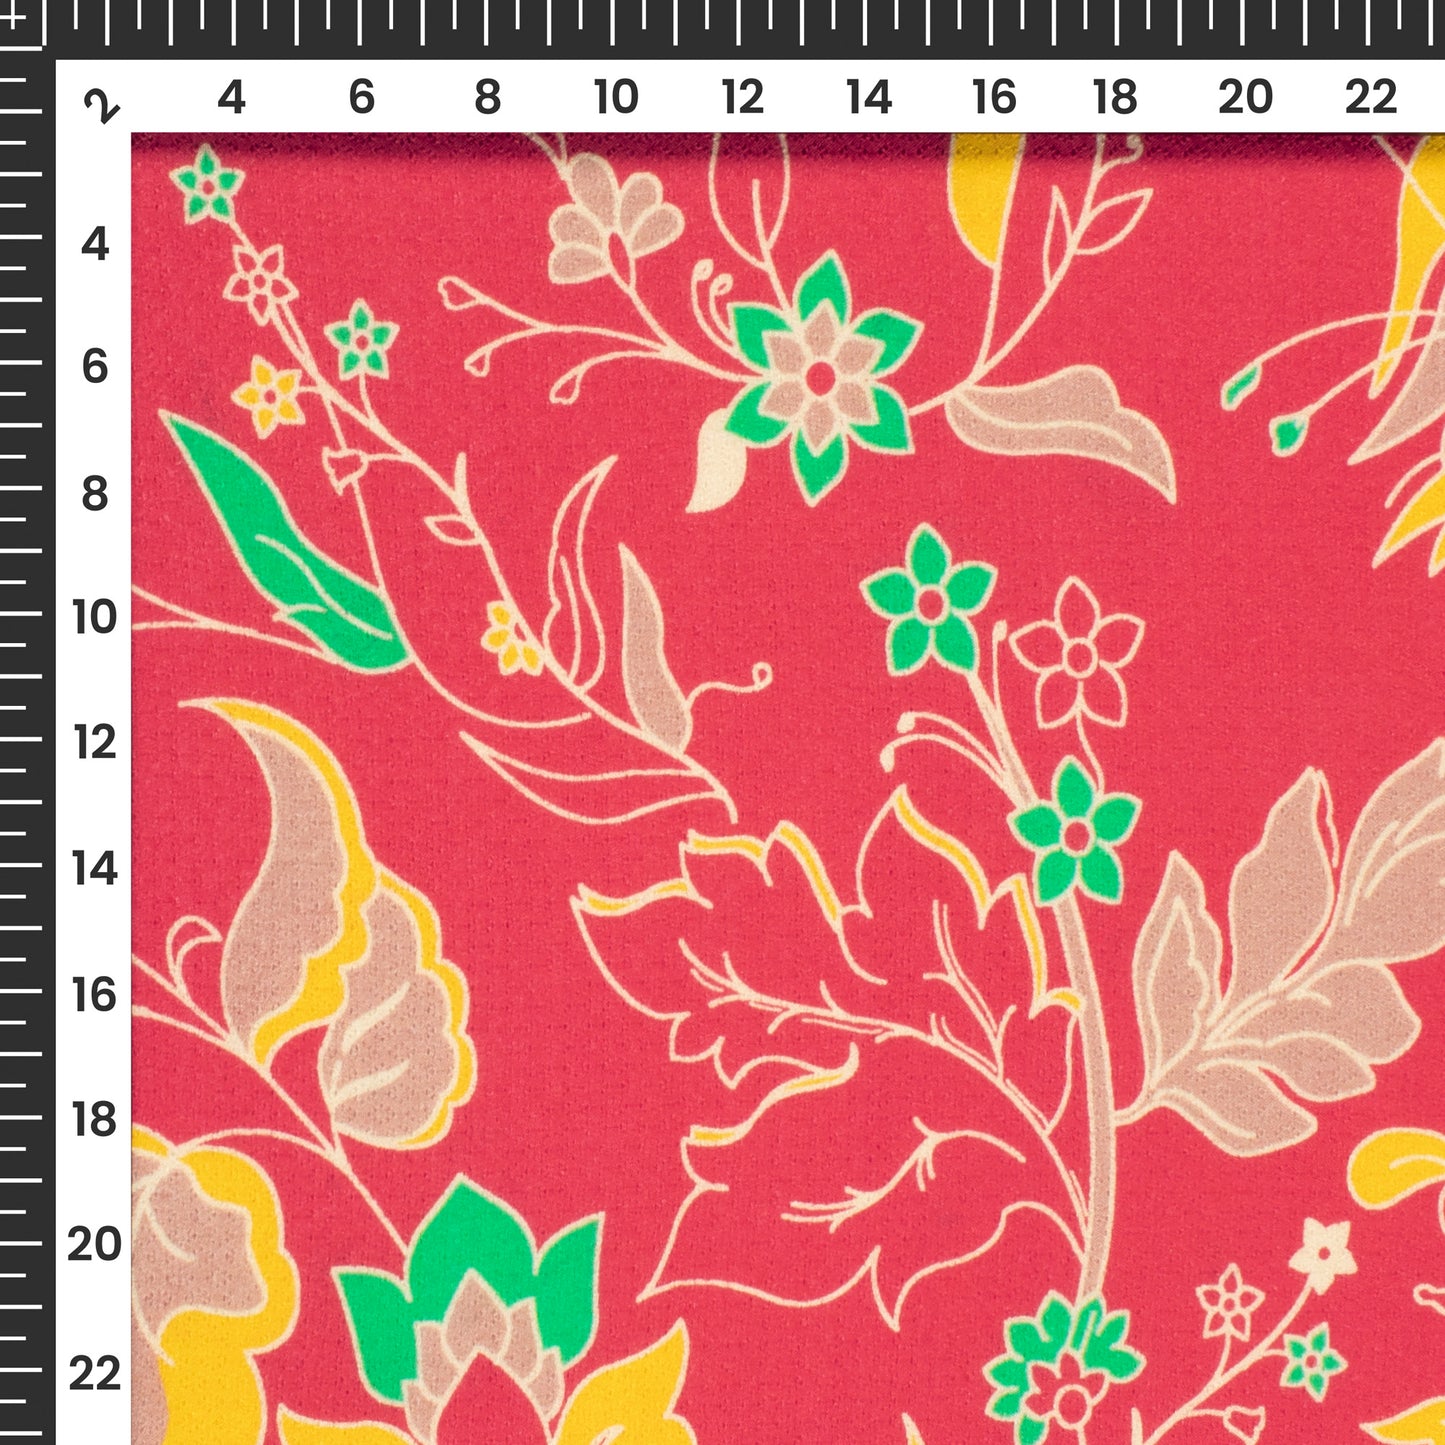 Crimson Red Floral Printed Sustainable Eucalyptus Fabric